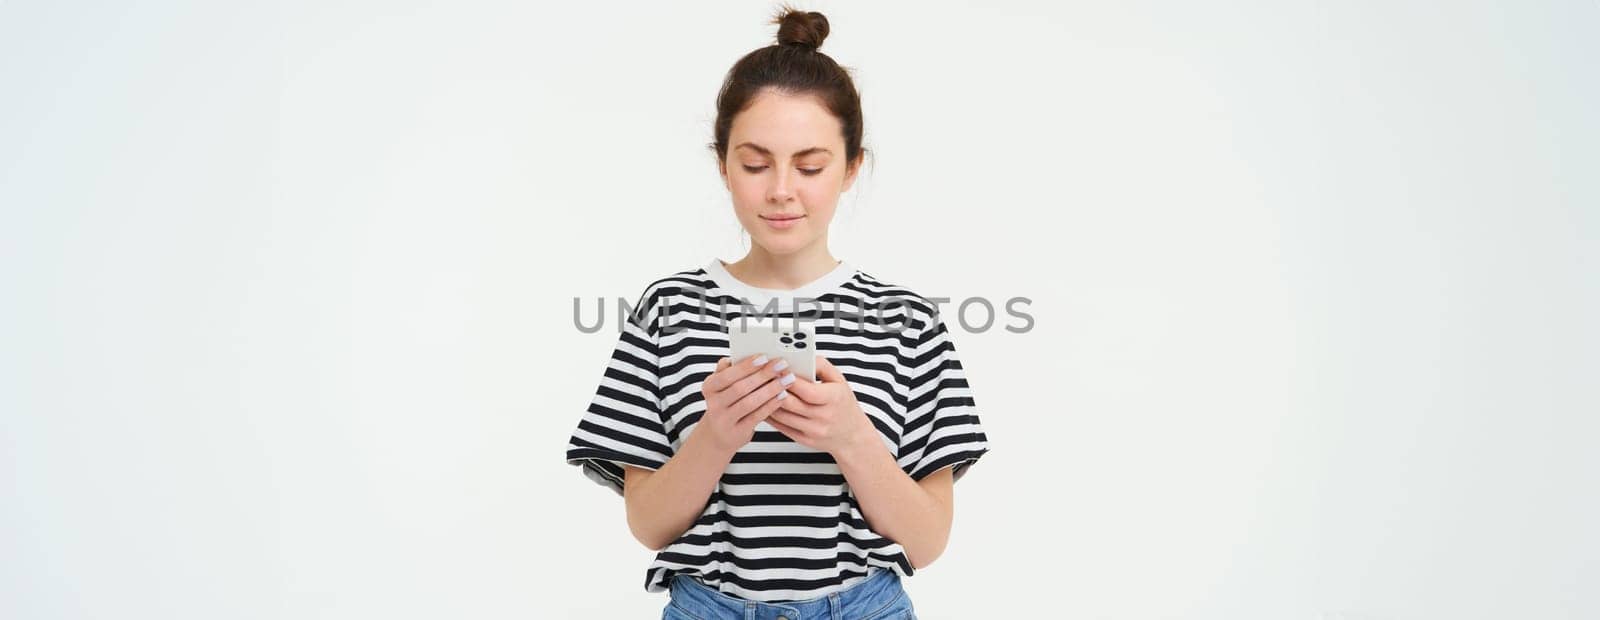 Technology and lifestyle. Young woman standing over white background with smartphone.